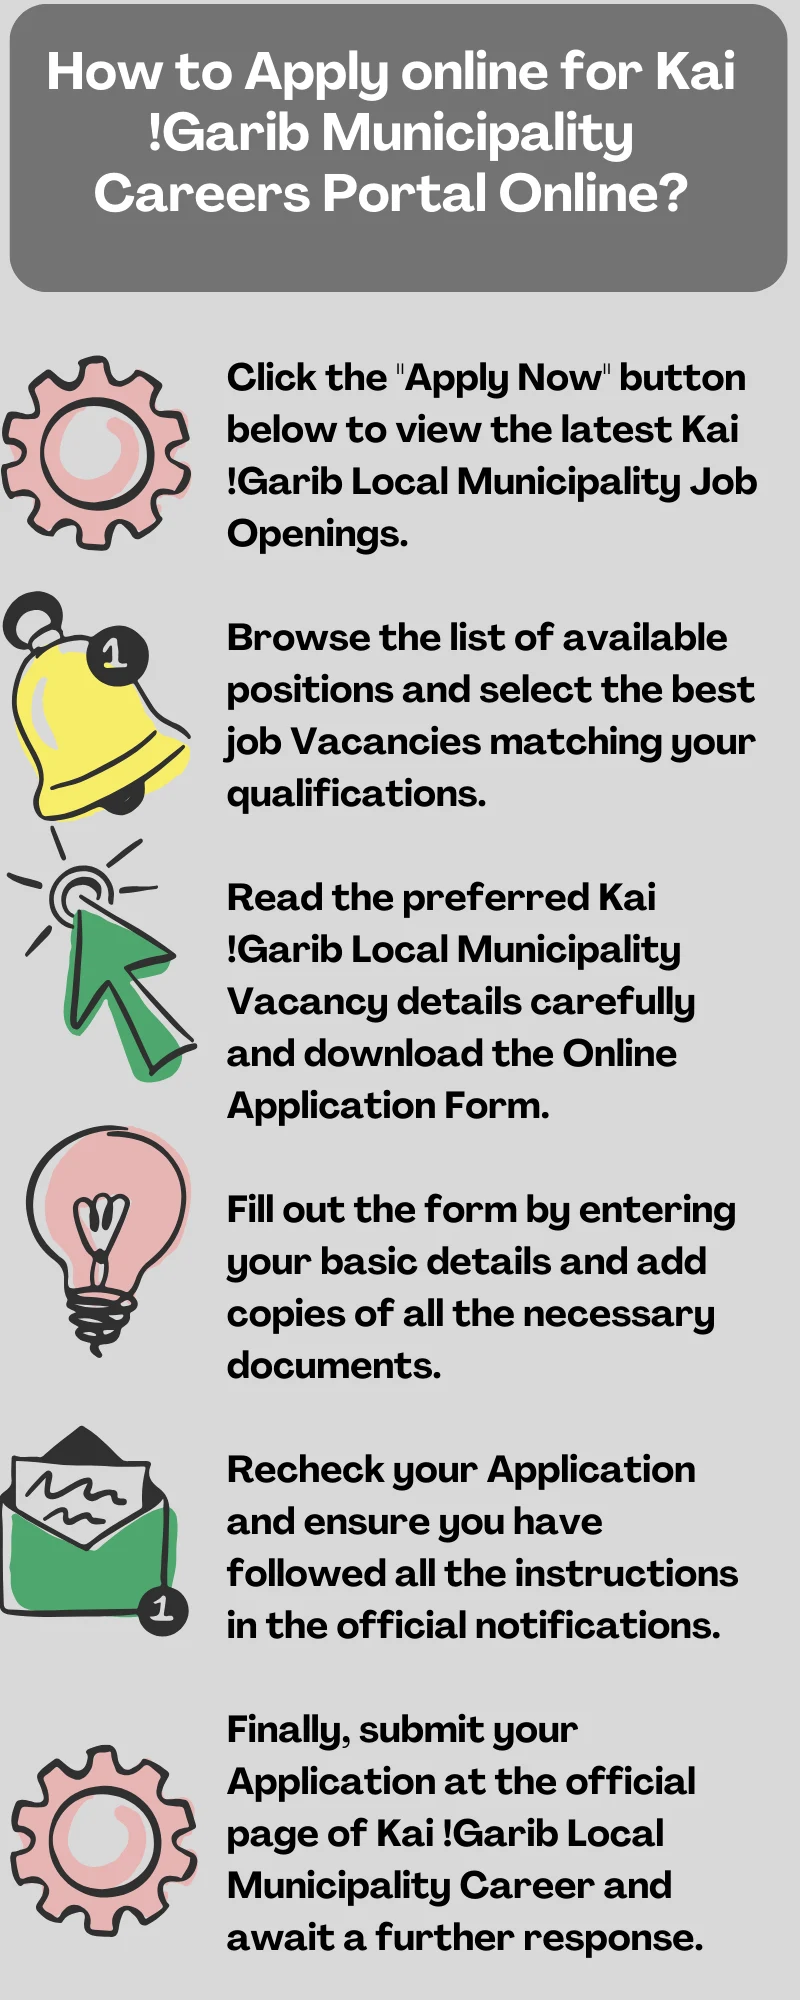 How to Apply online for Kai !Garib Municipality Careers Portal Online?